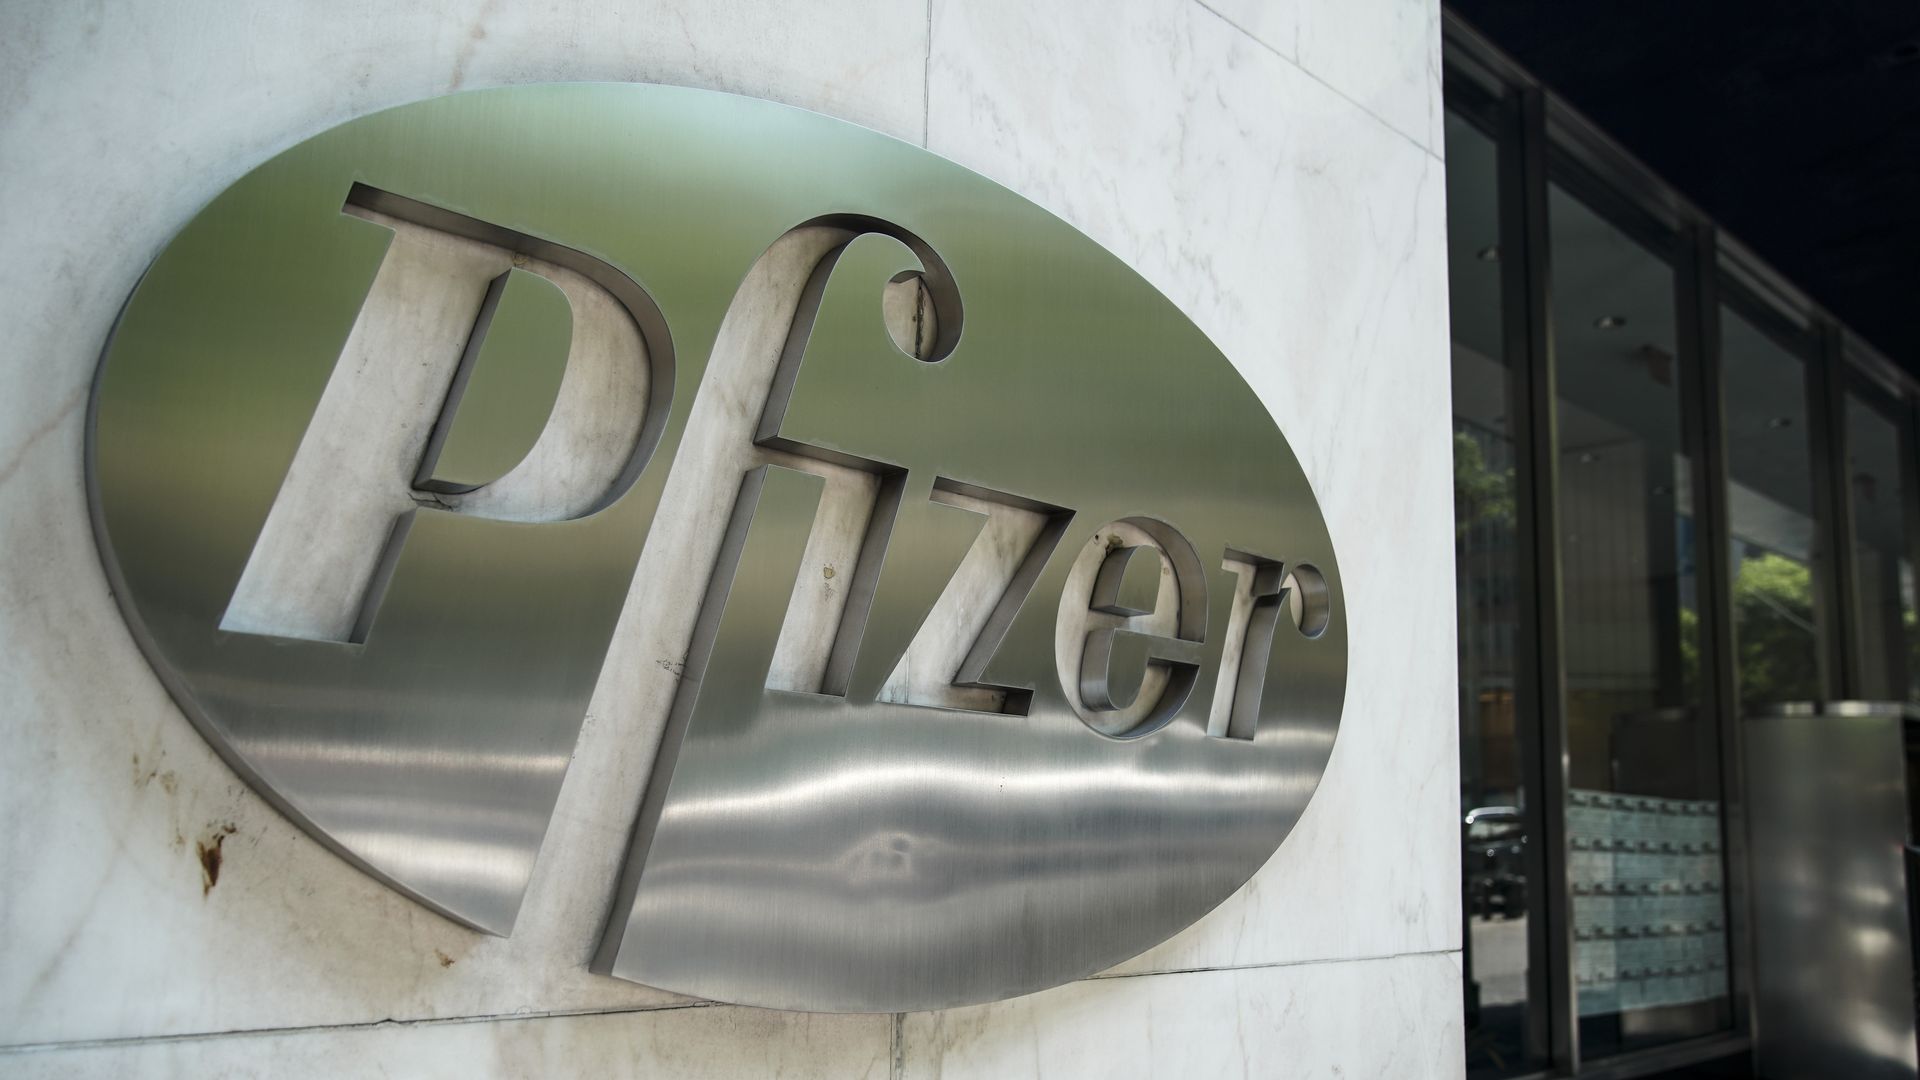 Pfizer's silver logo on a building.